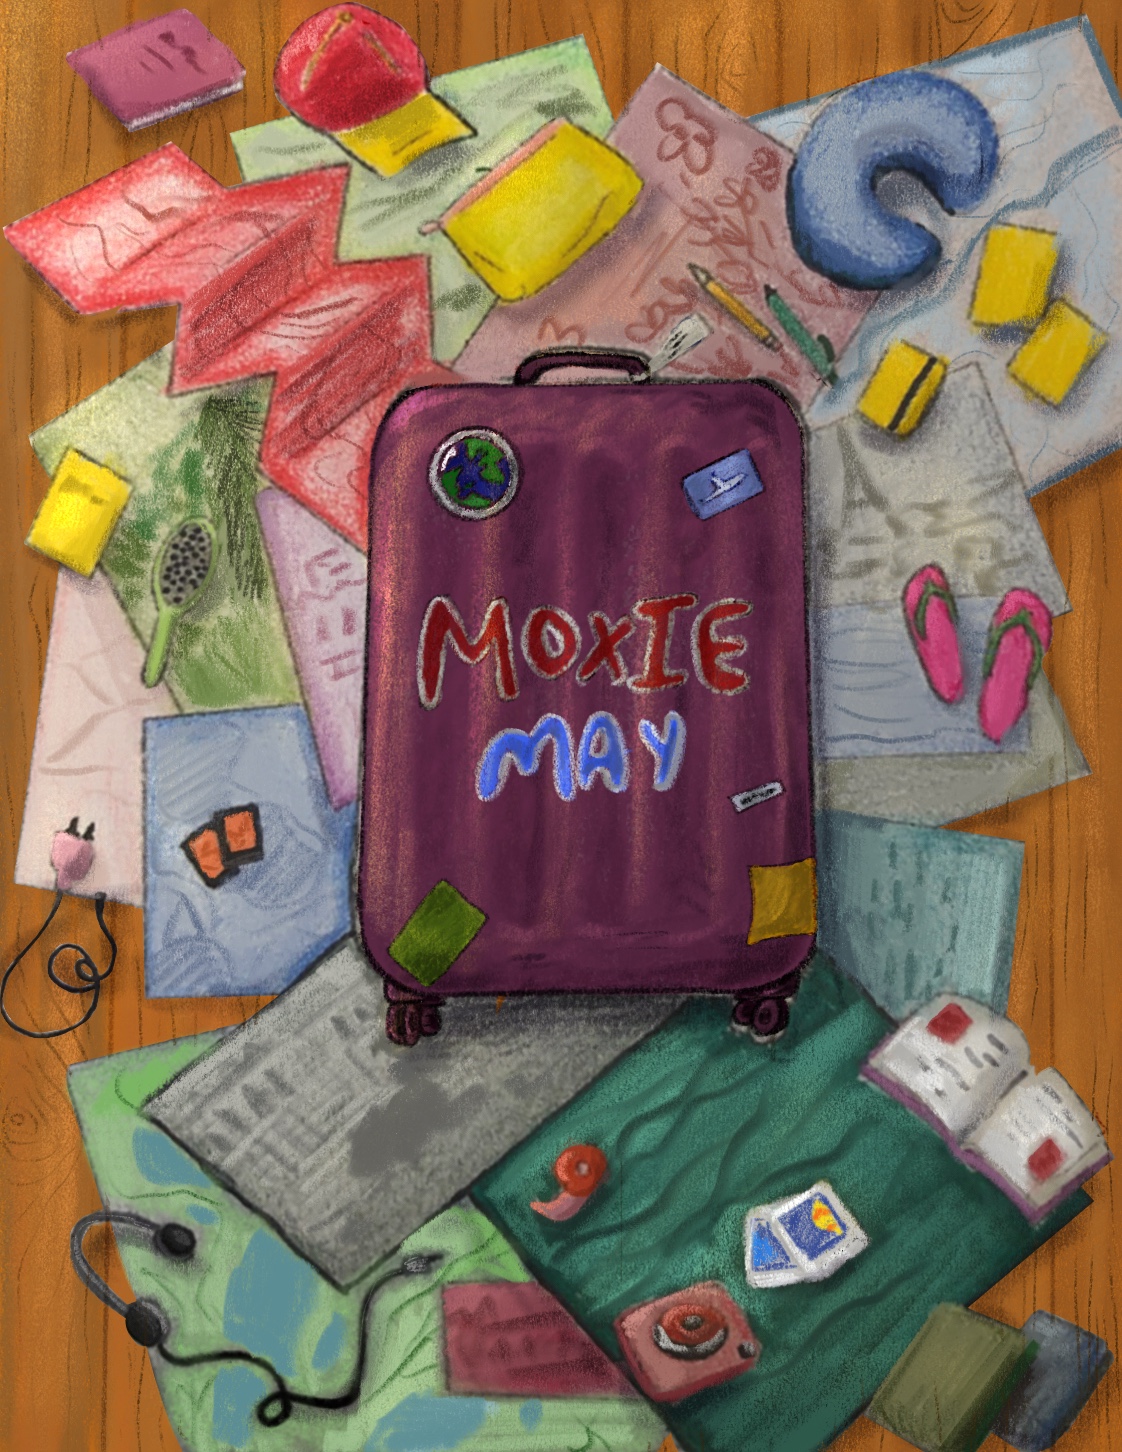 Teen magazine cover that reads, "Moxie May" on an illustration of a purple suitcase. Behind the purple suitcase are other illustrated objects such as a brush, a book, flip flops, a hat, and maps and pieces of paper.